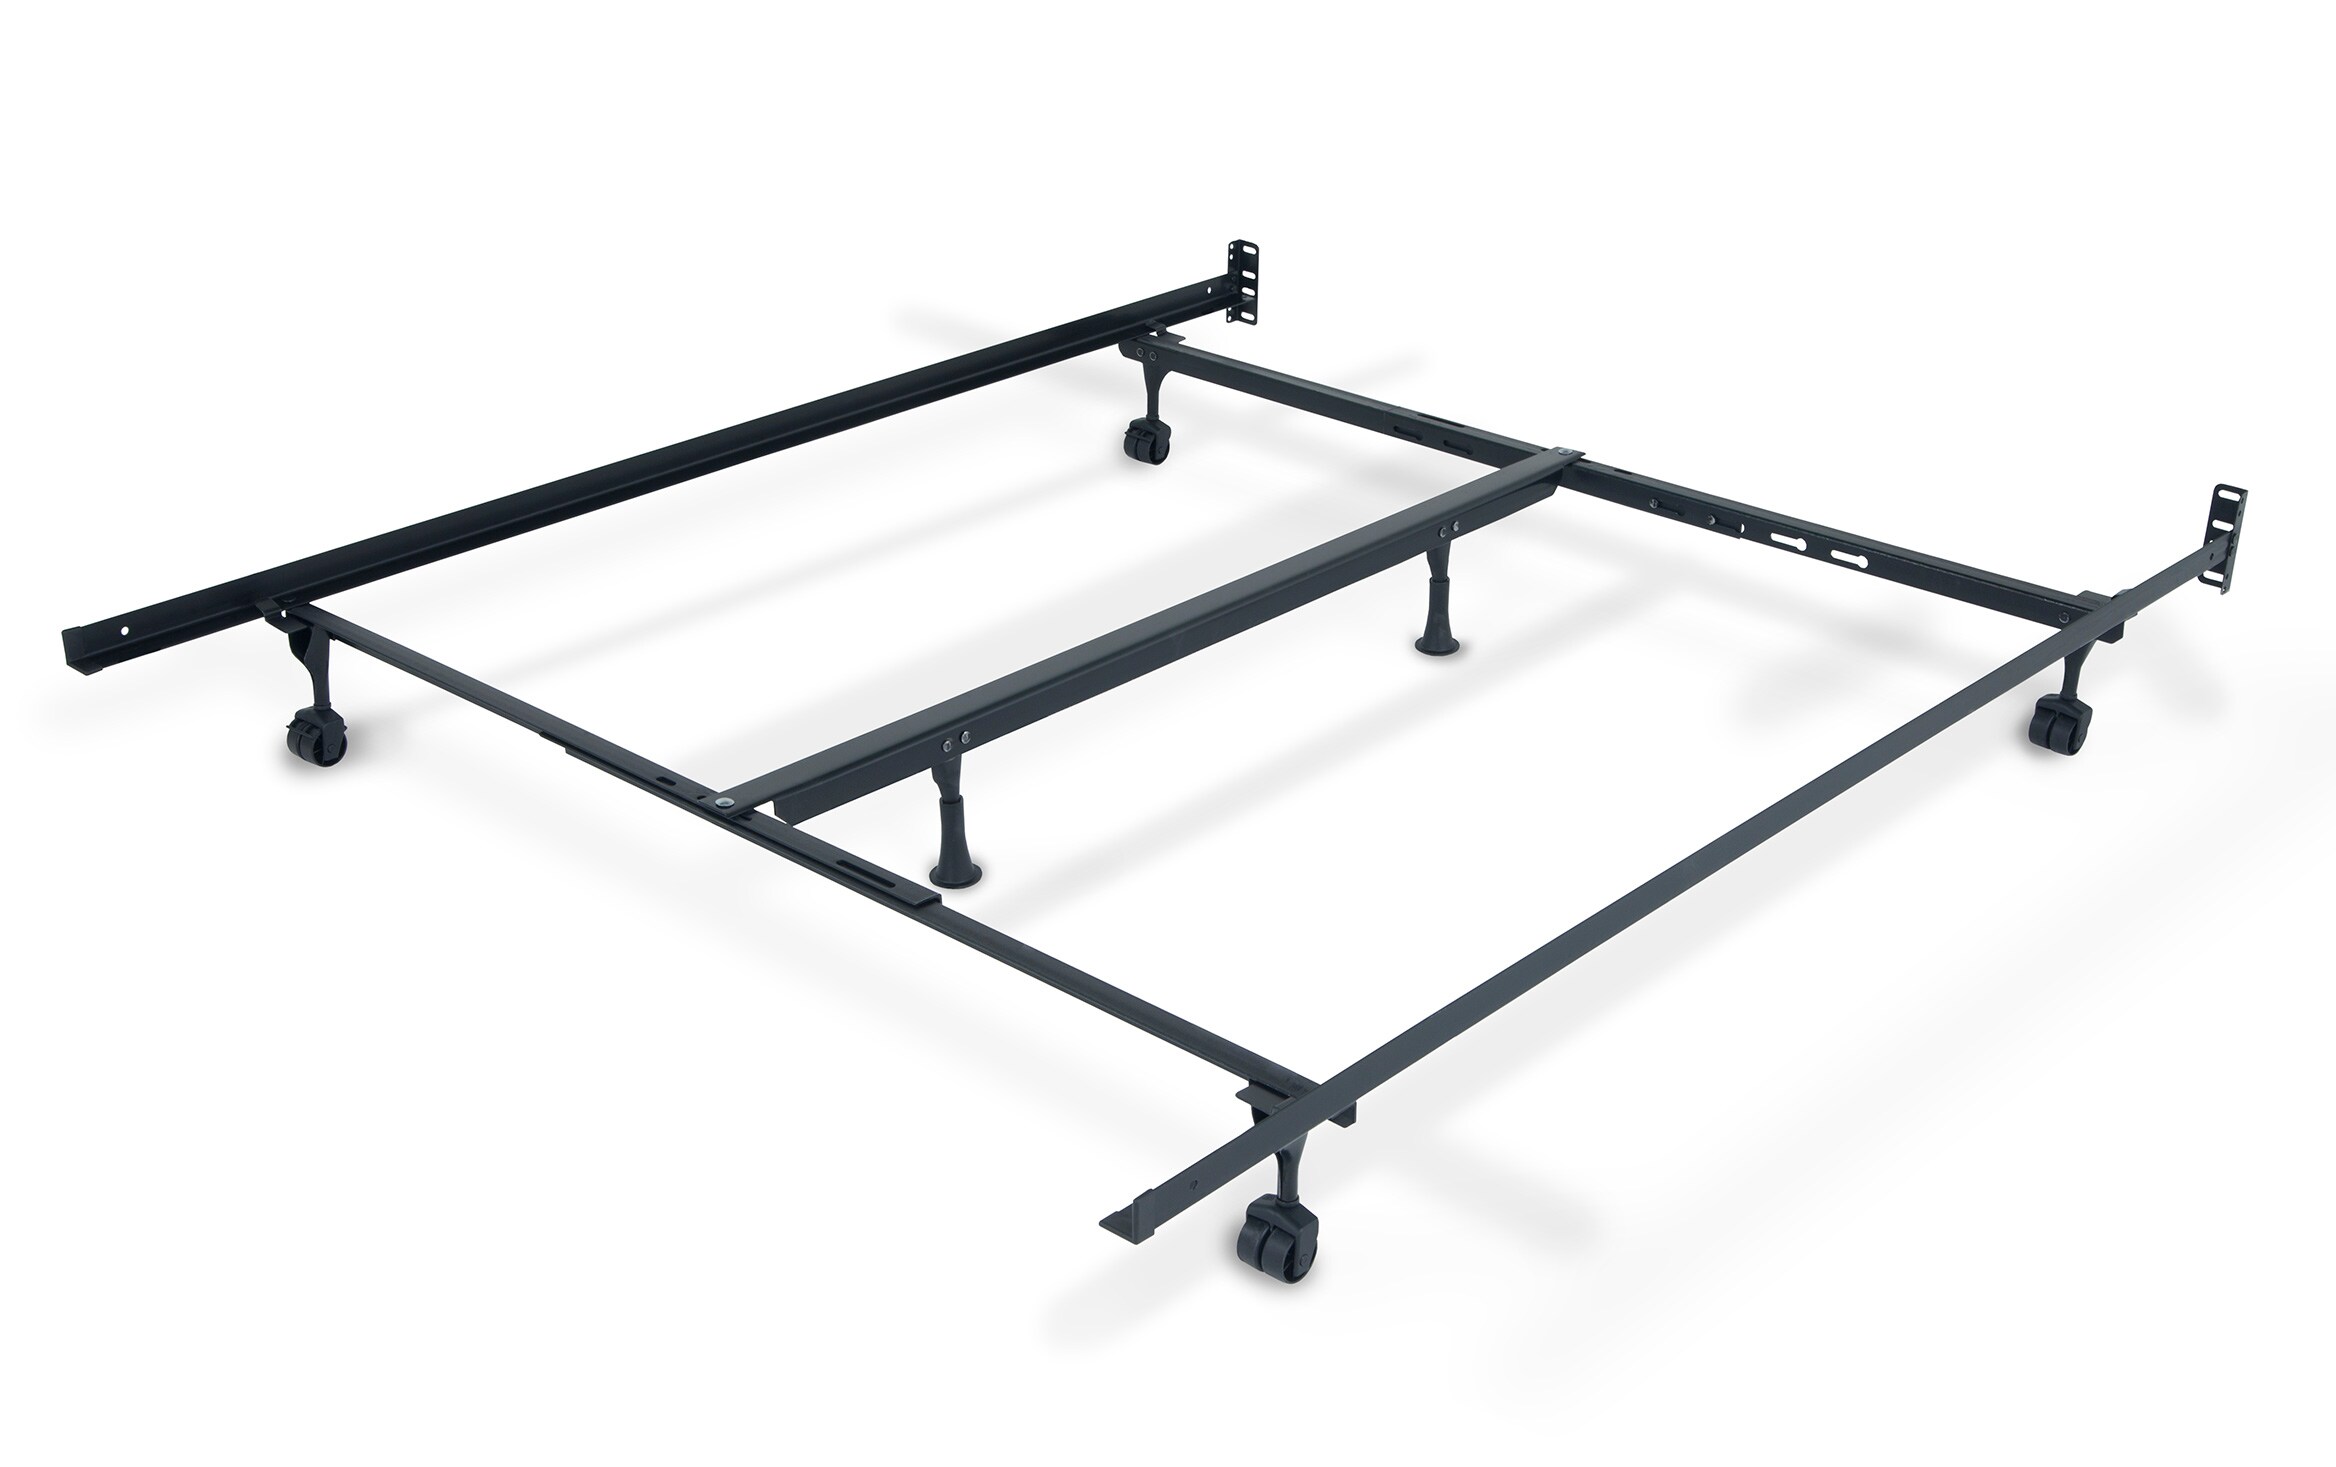 Queen King Bed Frame With Casters Bob, Used King Size Bed Frame